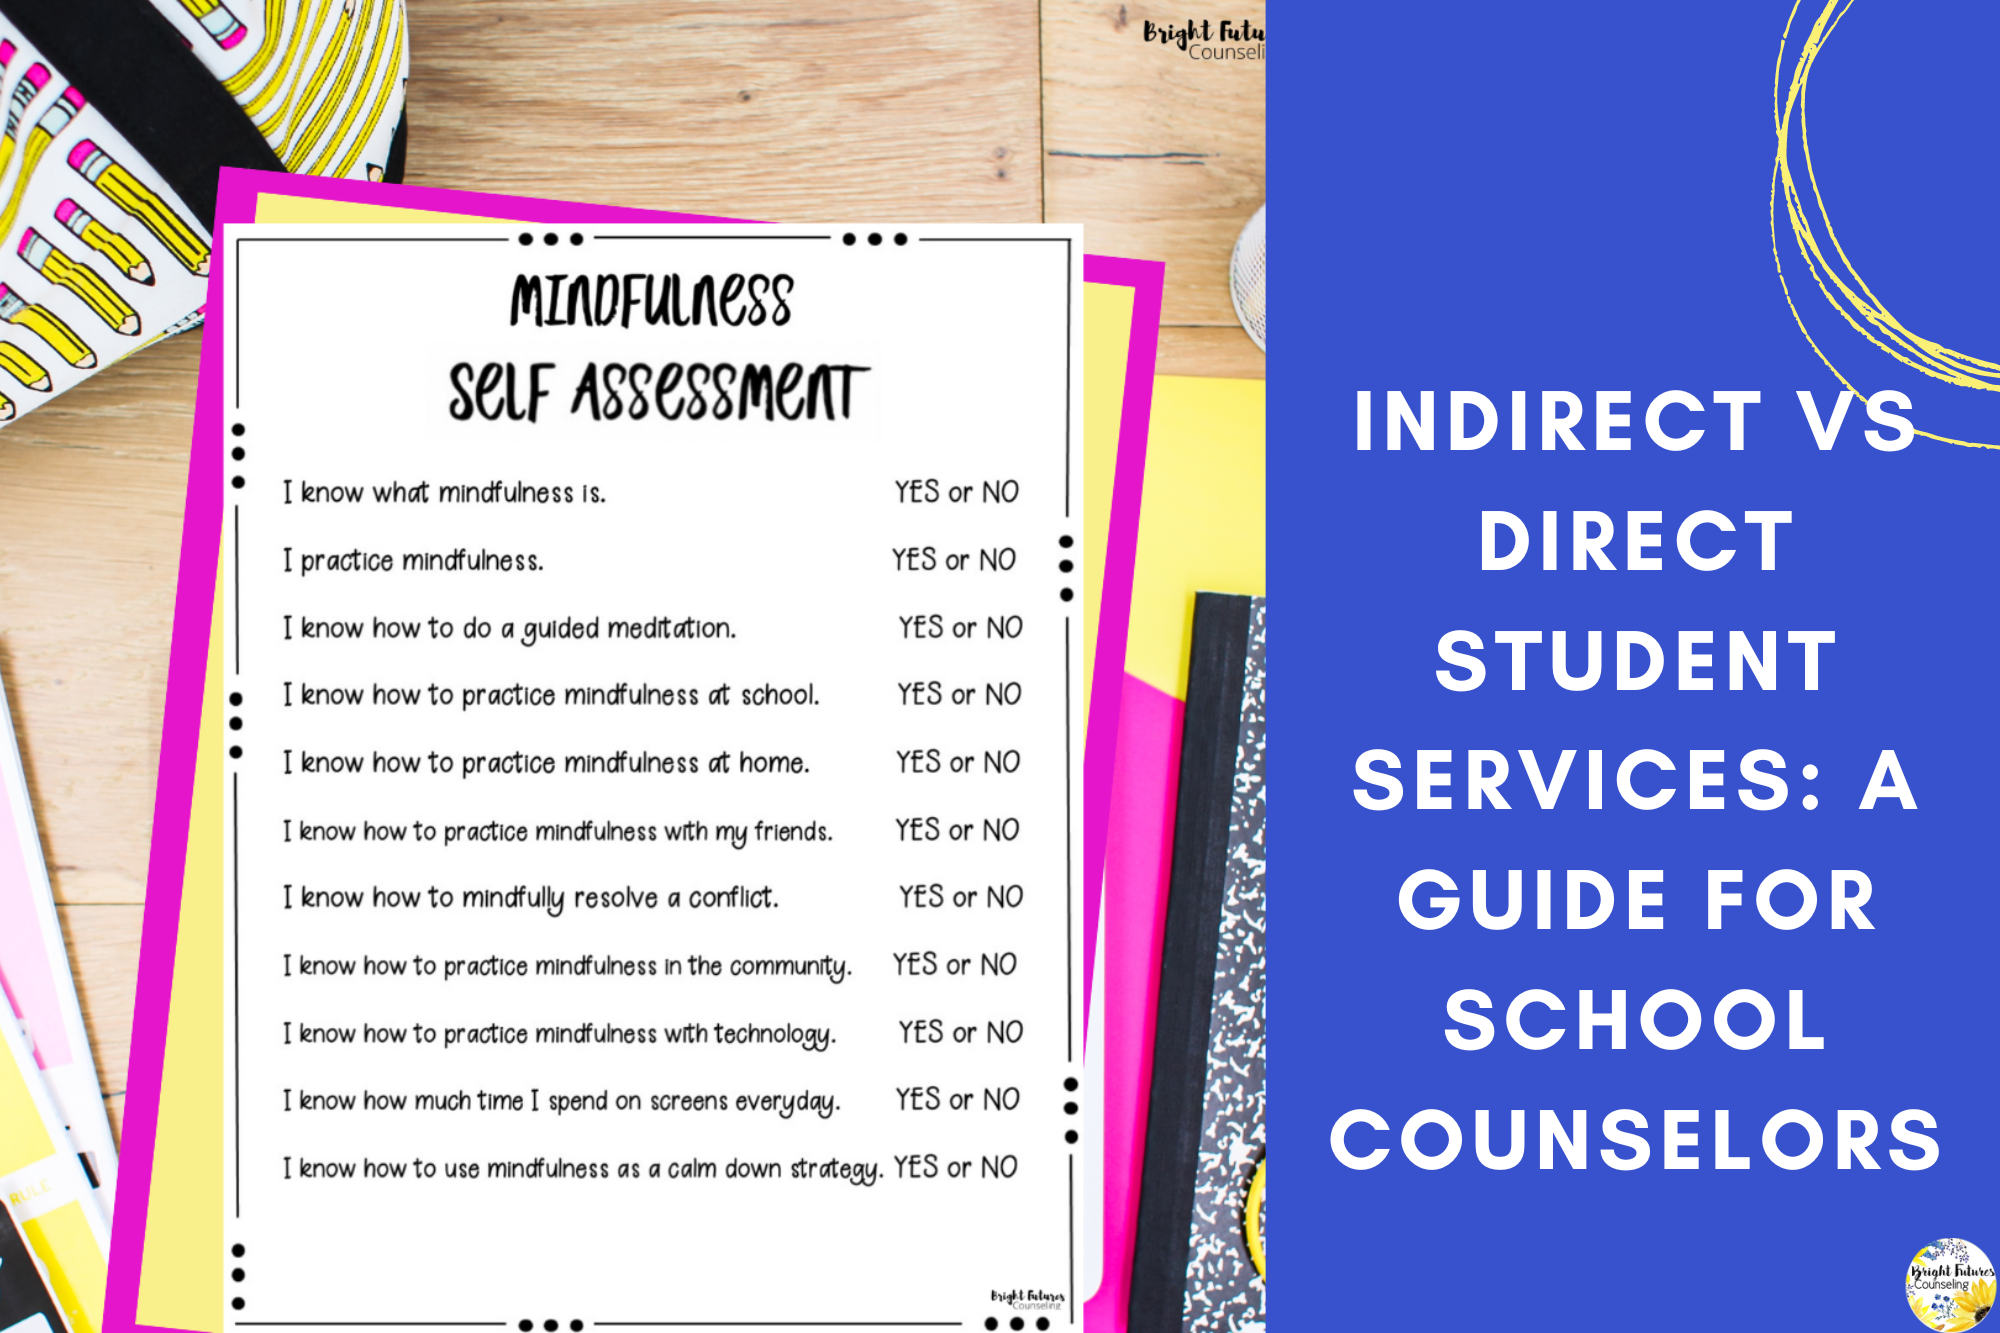 Indirect vs Direct Student Services: A Guide for School Counselors